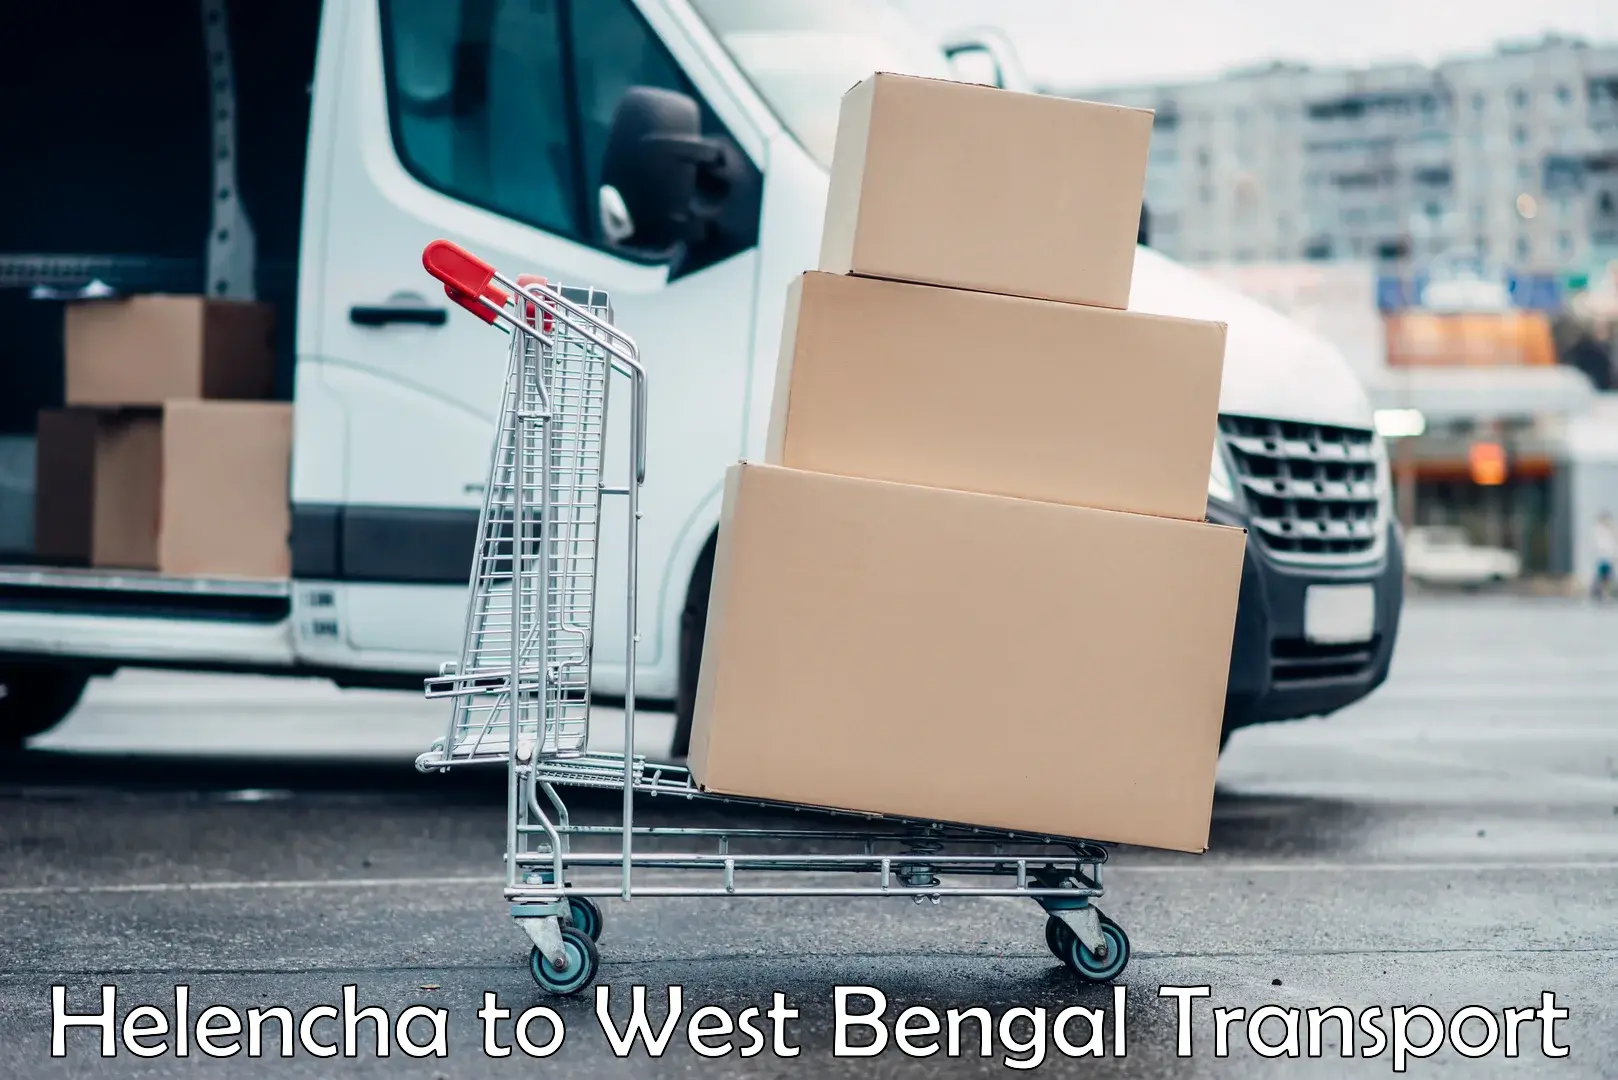 Commercial transport service Helencha to West Bengal